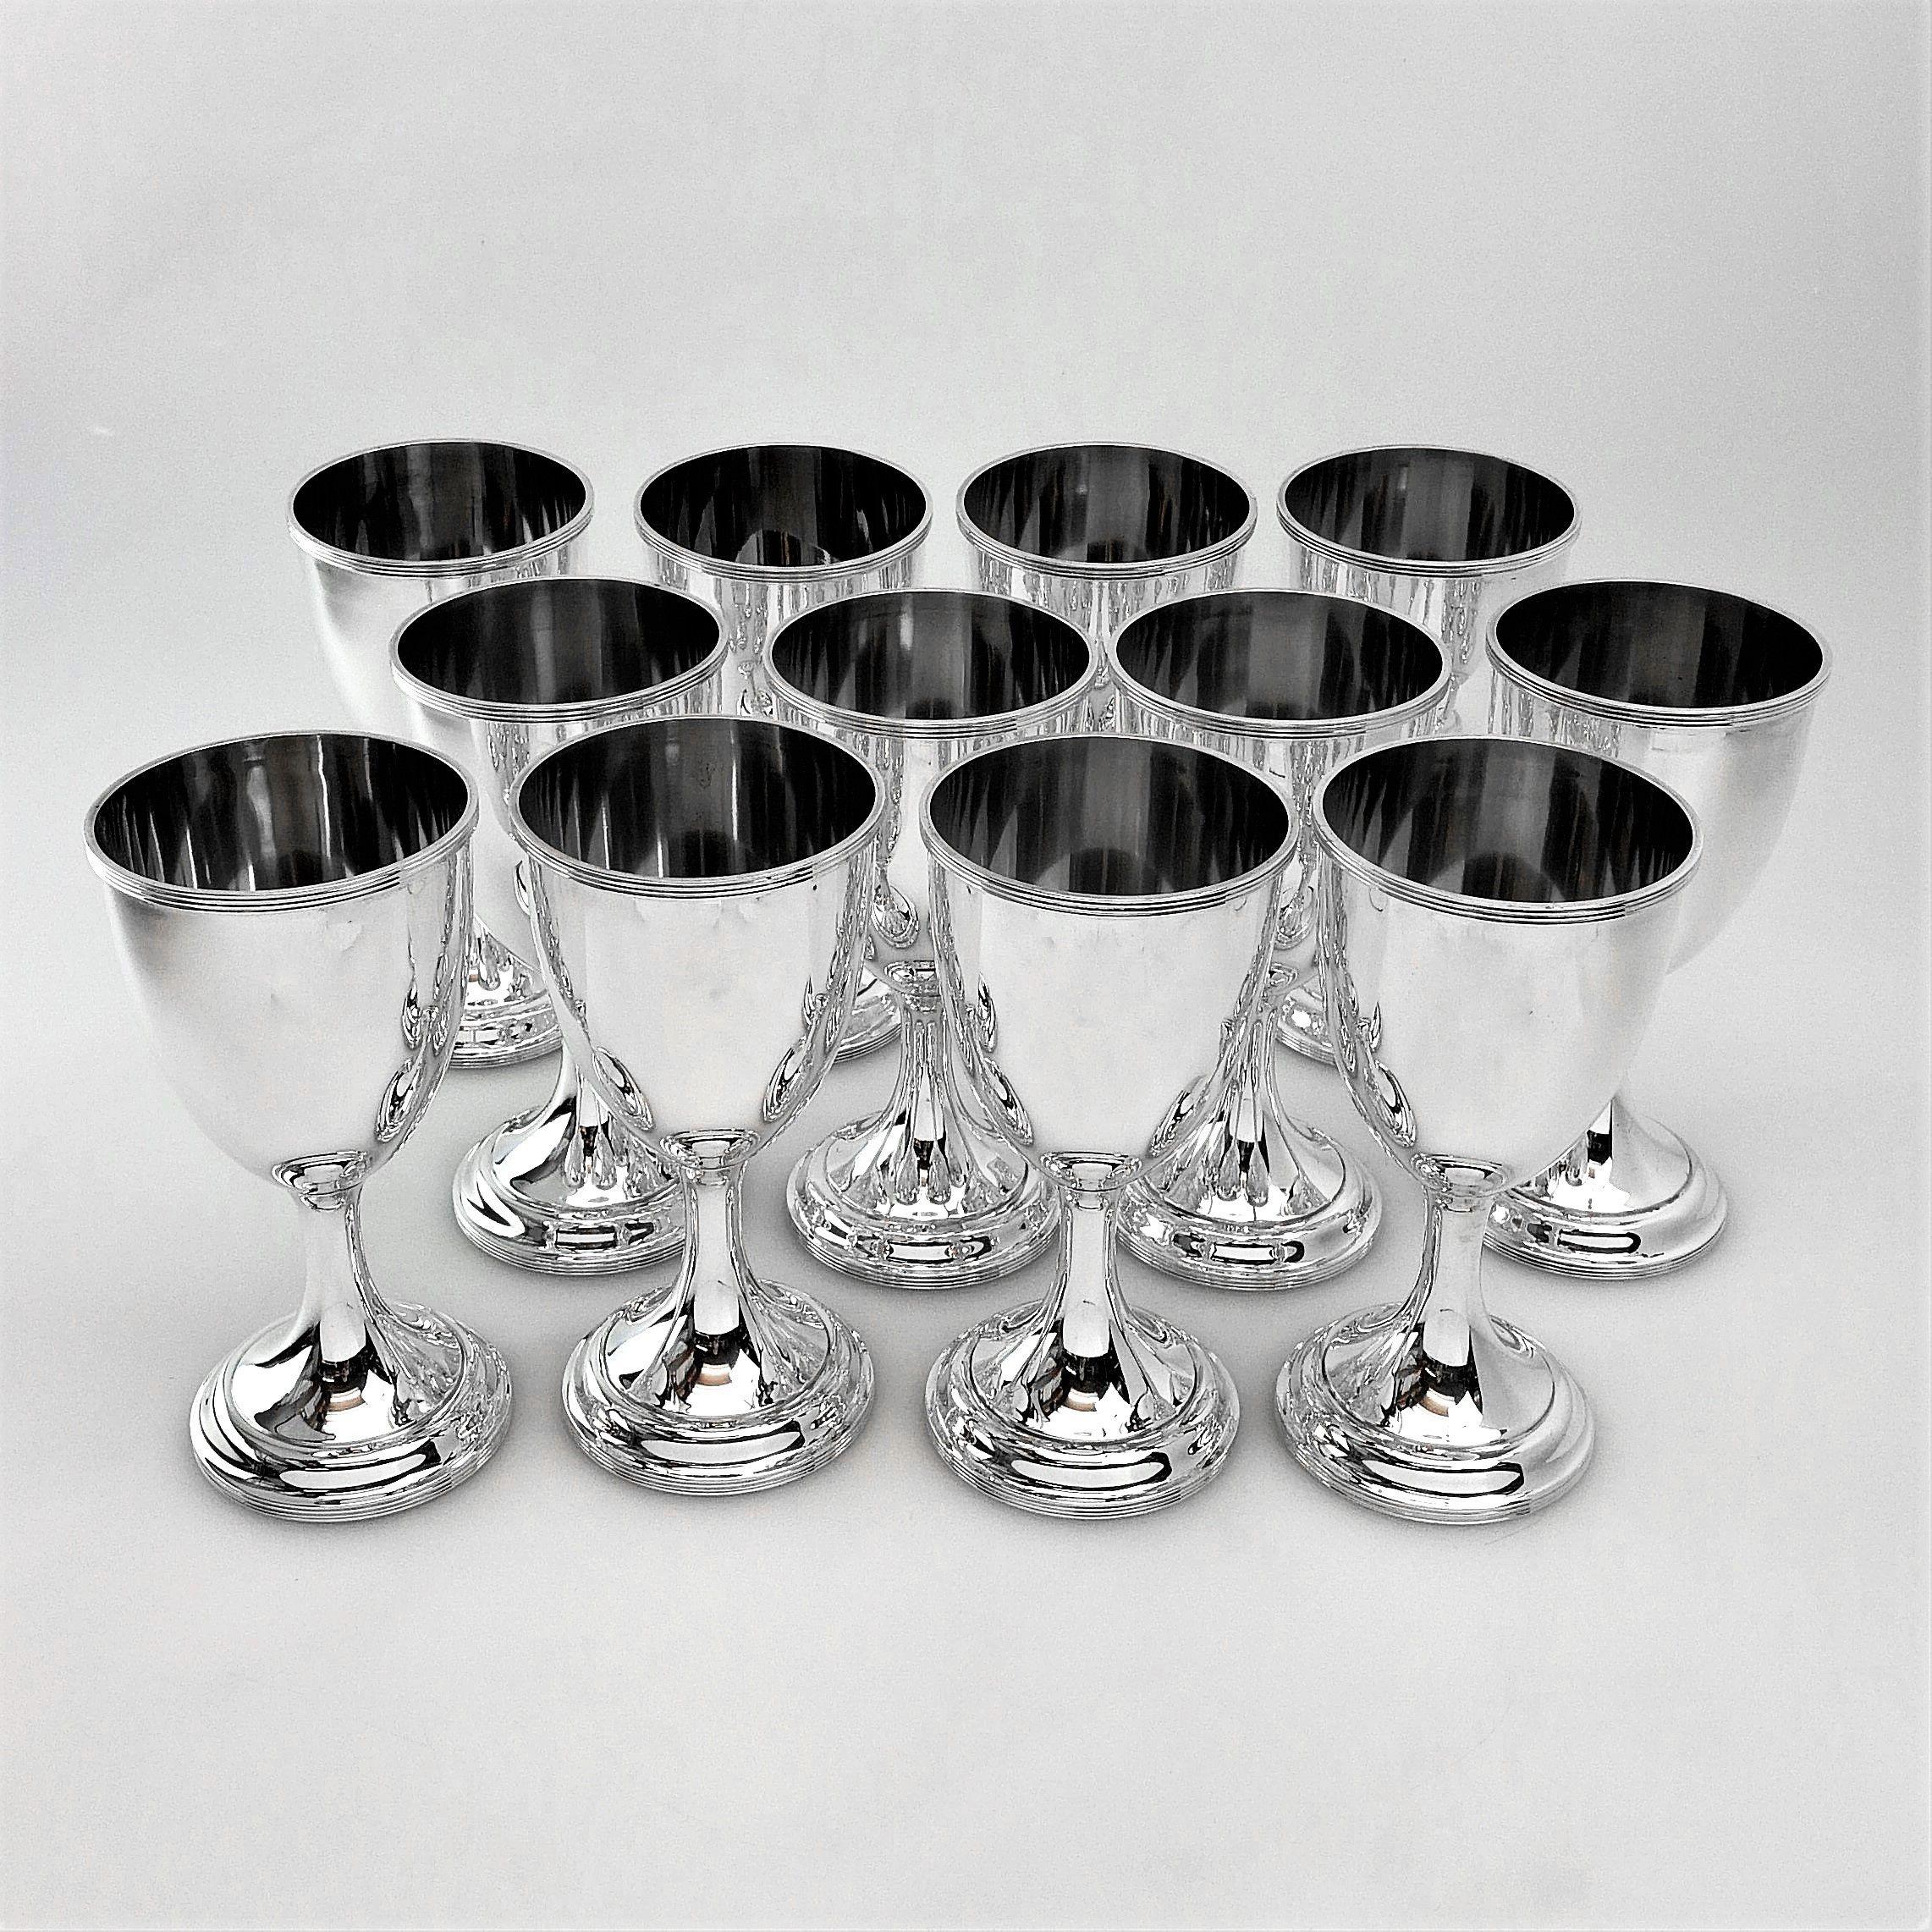 A set of 12 antique solid Silver Wine Goblets / Drinking Goblets standing on a wide spread pedestal foot. The Goblets are simple and elegant in plain highly polished silver with an understated band of reeding on the lip and foot. 
 
Made in America